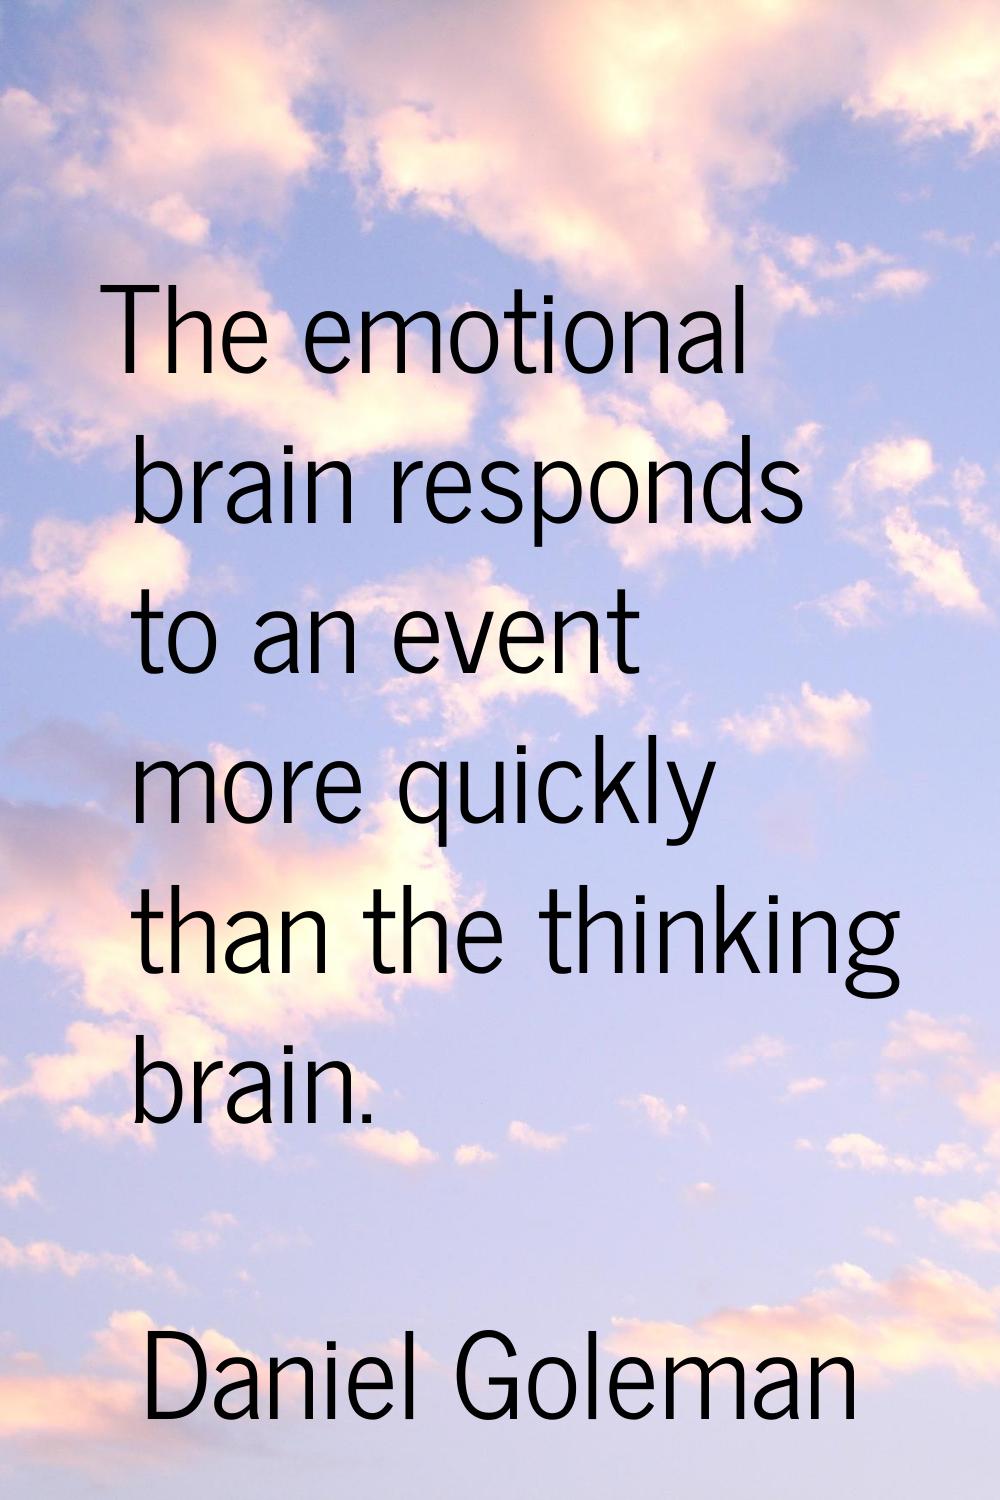 The emotional brain responds to an event more quickly than the thinking brain.